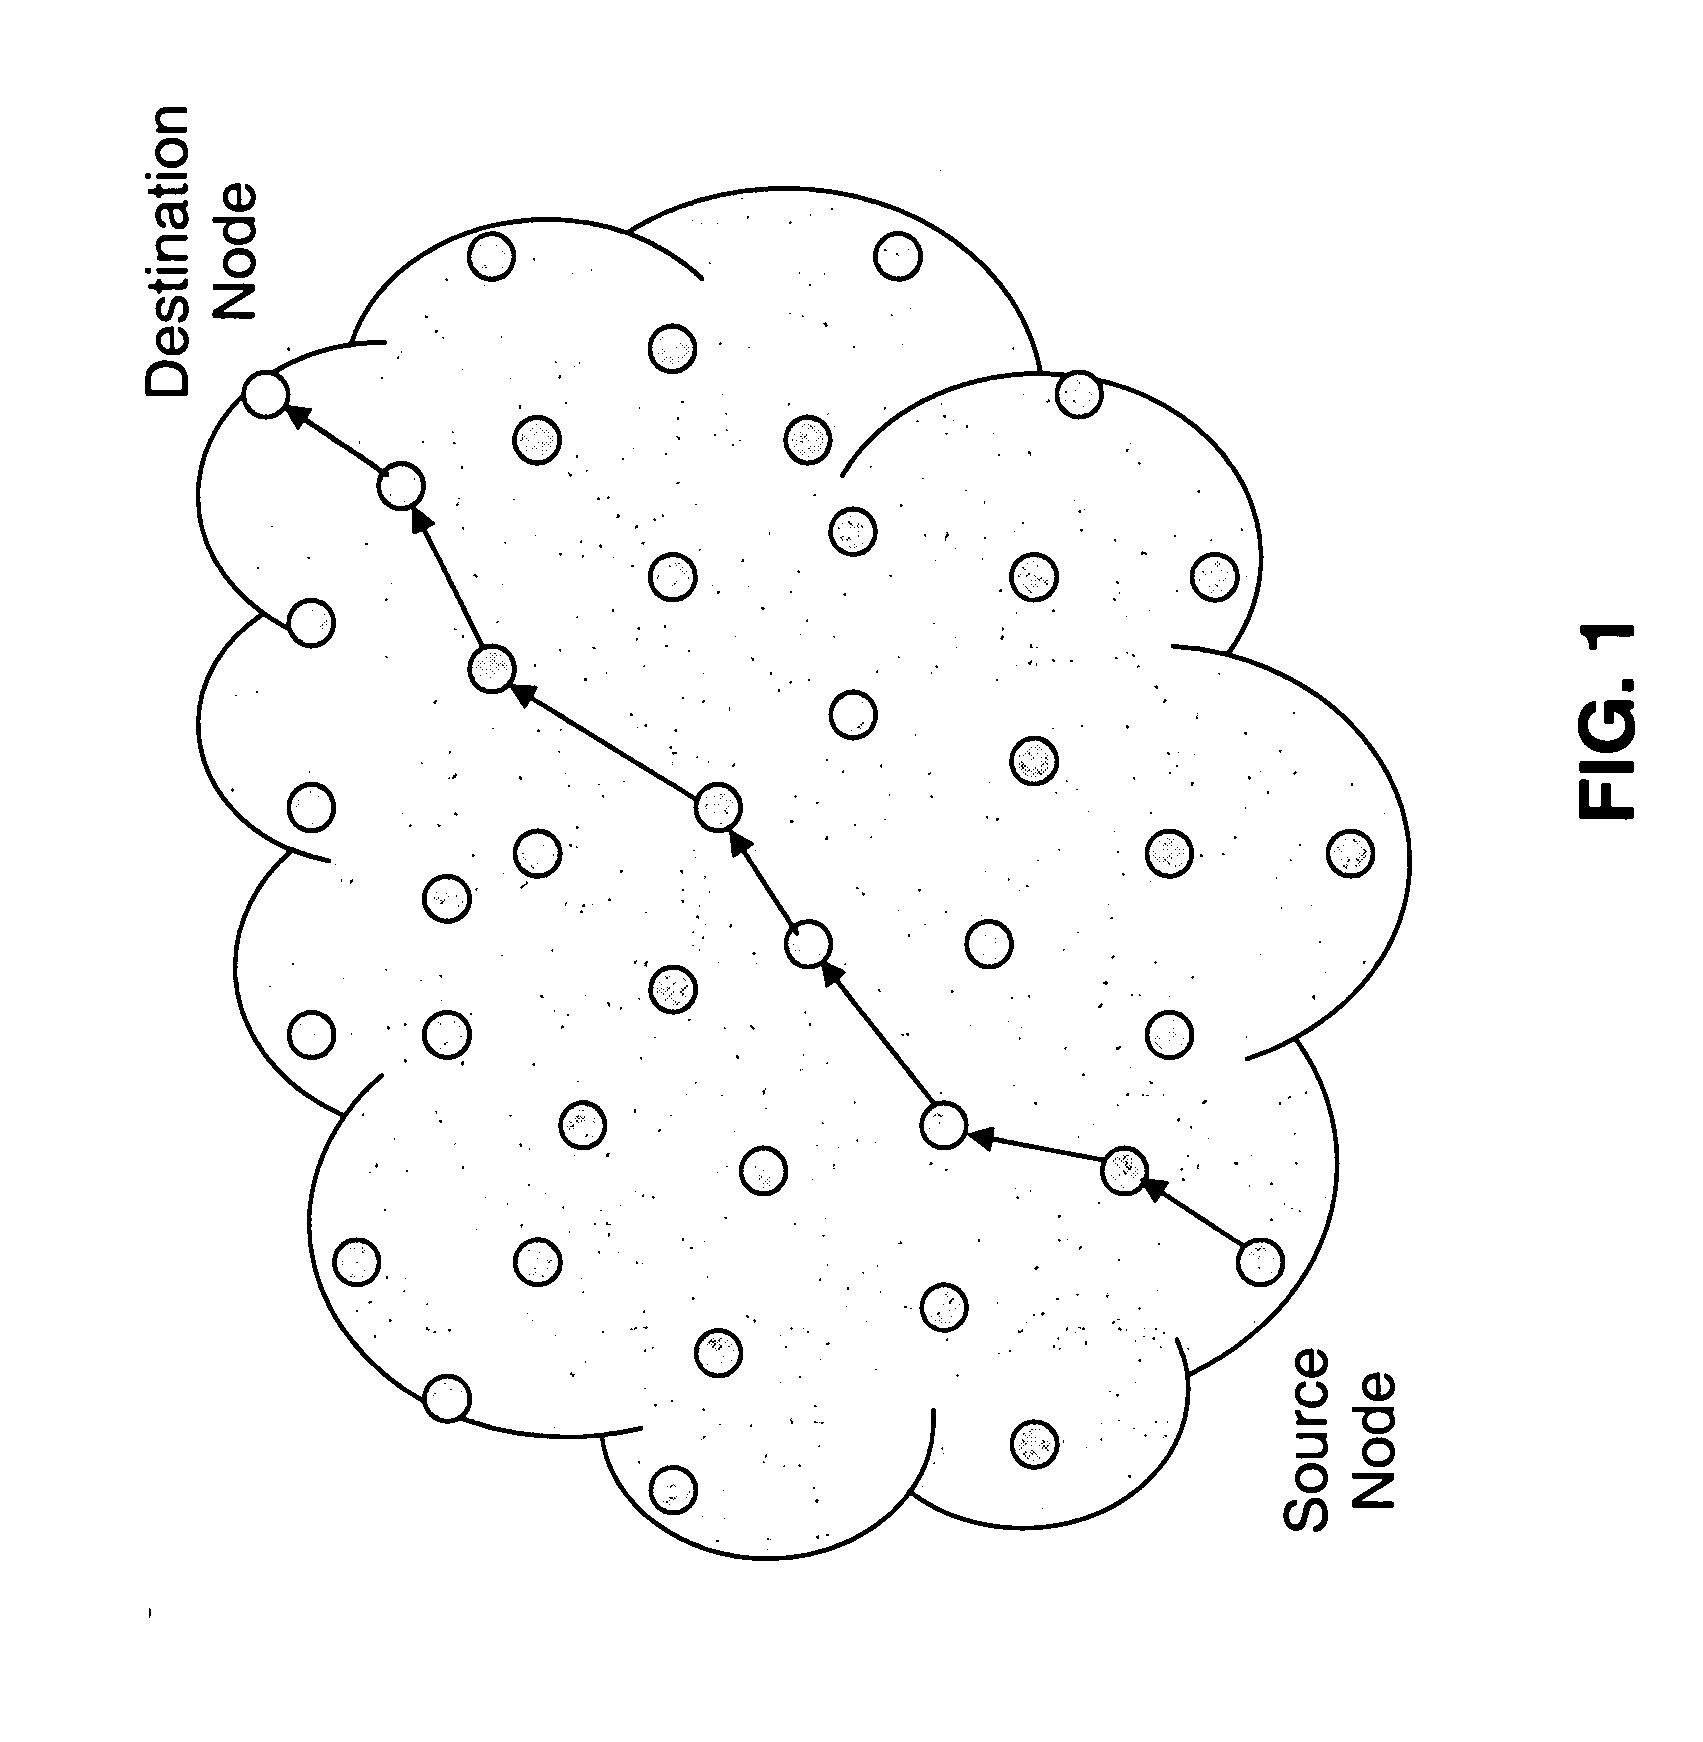 Mobile nodal based communication system, method and apparatus